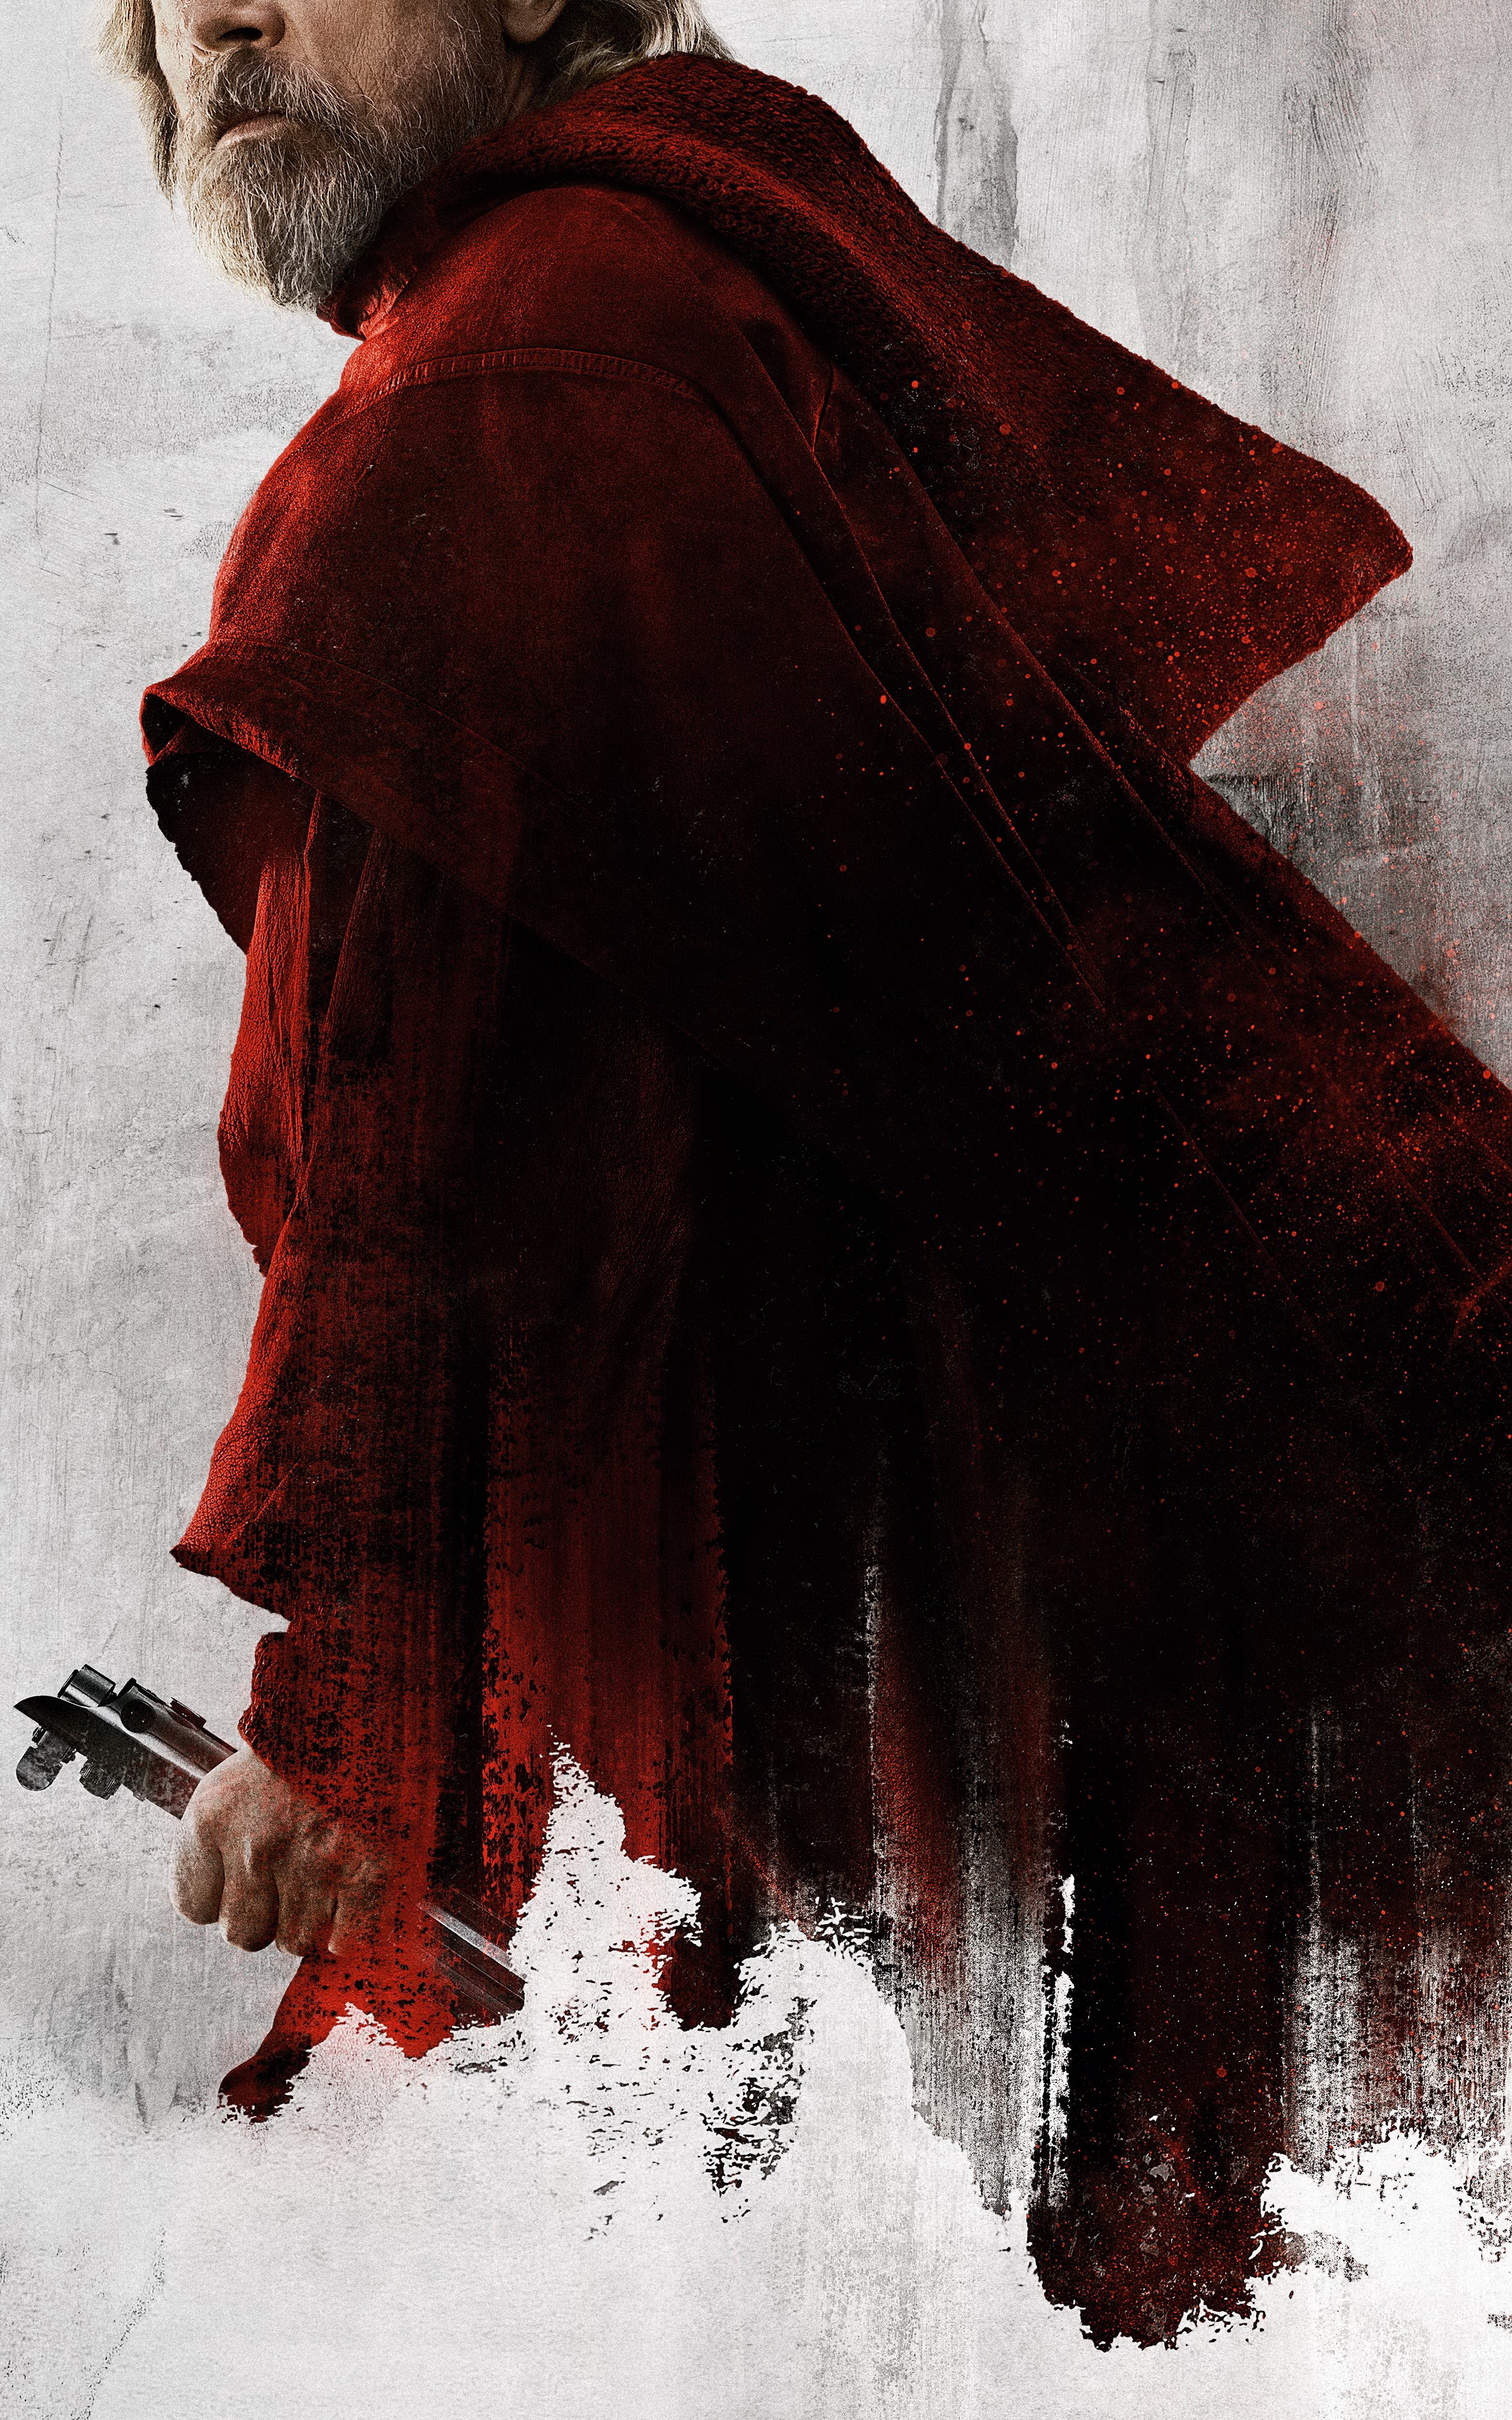 Holds The Key For Us To Find Out Who Is The Last Jedi(s), , HD Wallpaper & Backgrounds